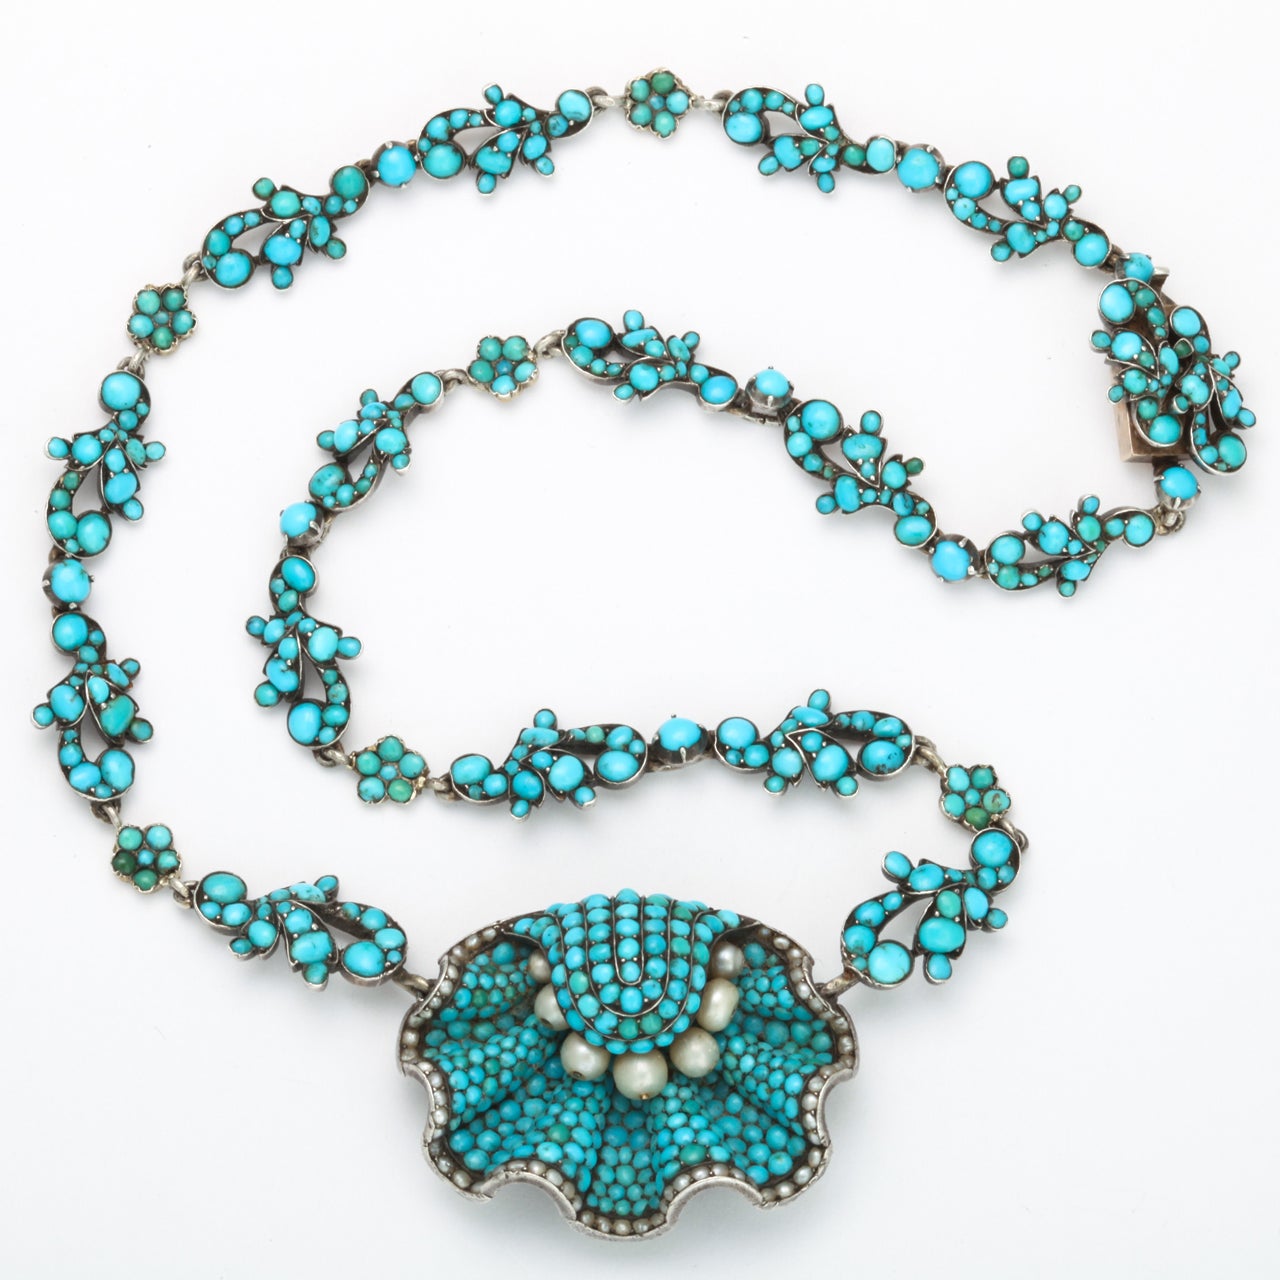 An astounding necklace designed with a garland of turquoise flowers that bring center stage a scallop shell bearing seven natural pearls. The workmanship is sublime, actually breathtaking.
The shell, completely encrusted with natural pave